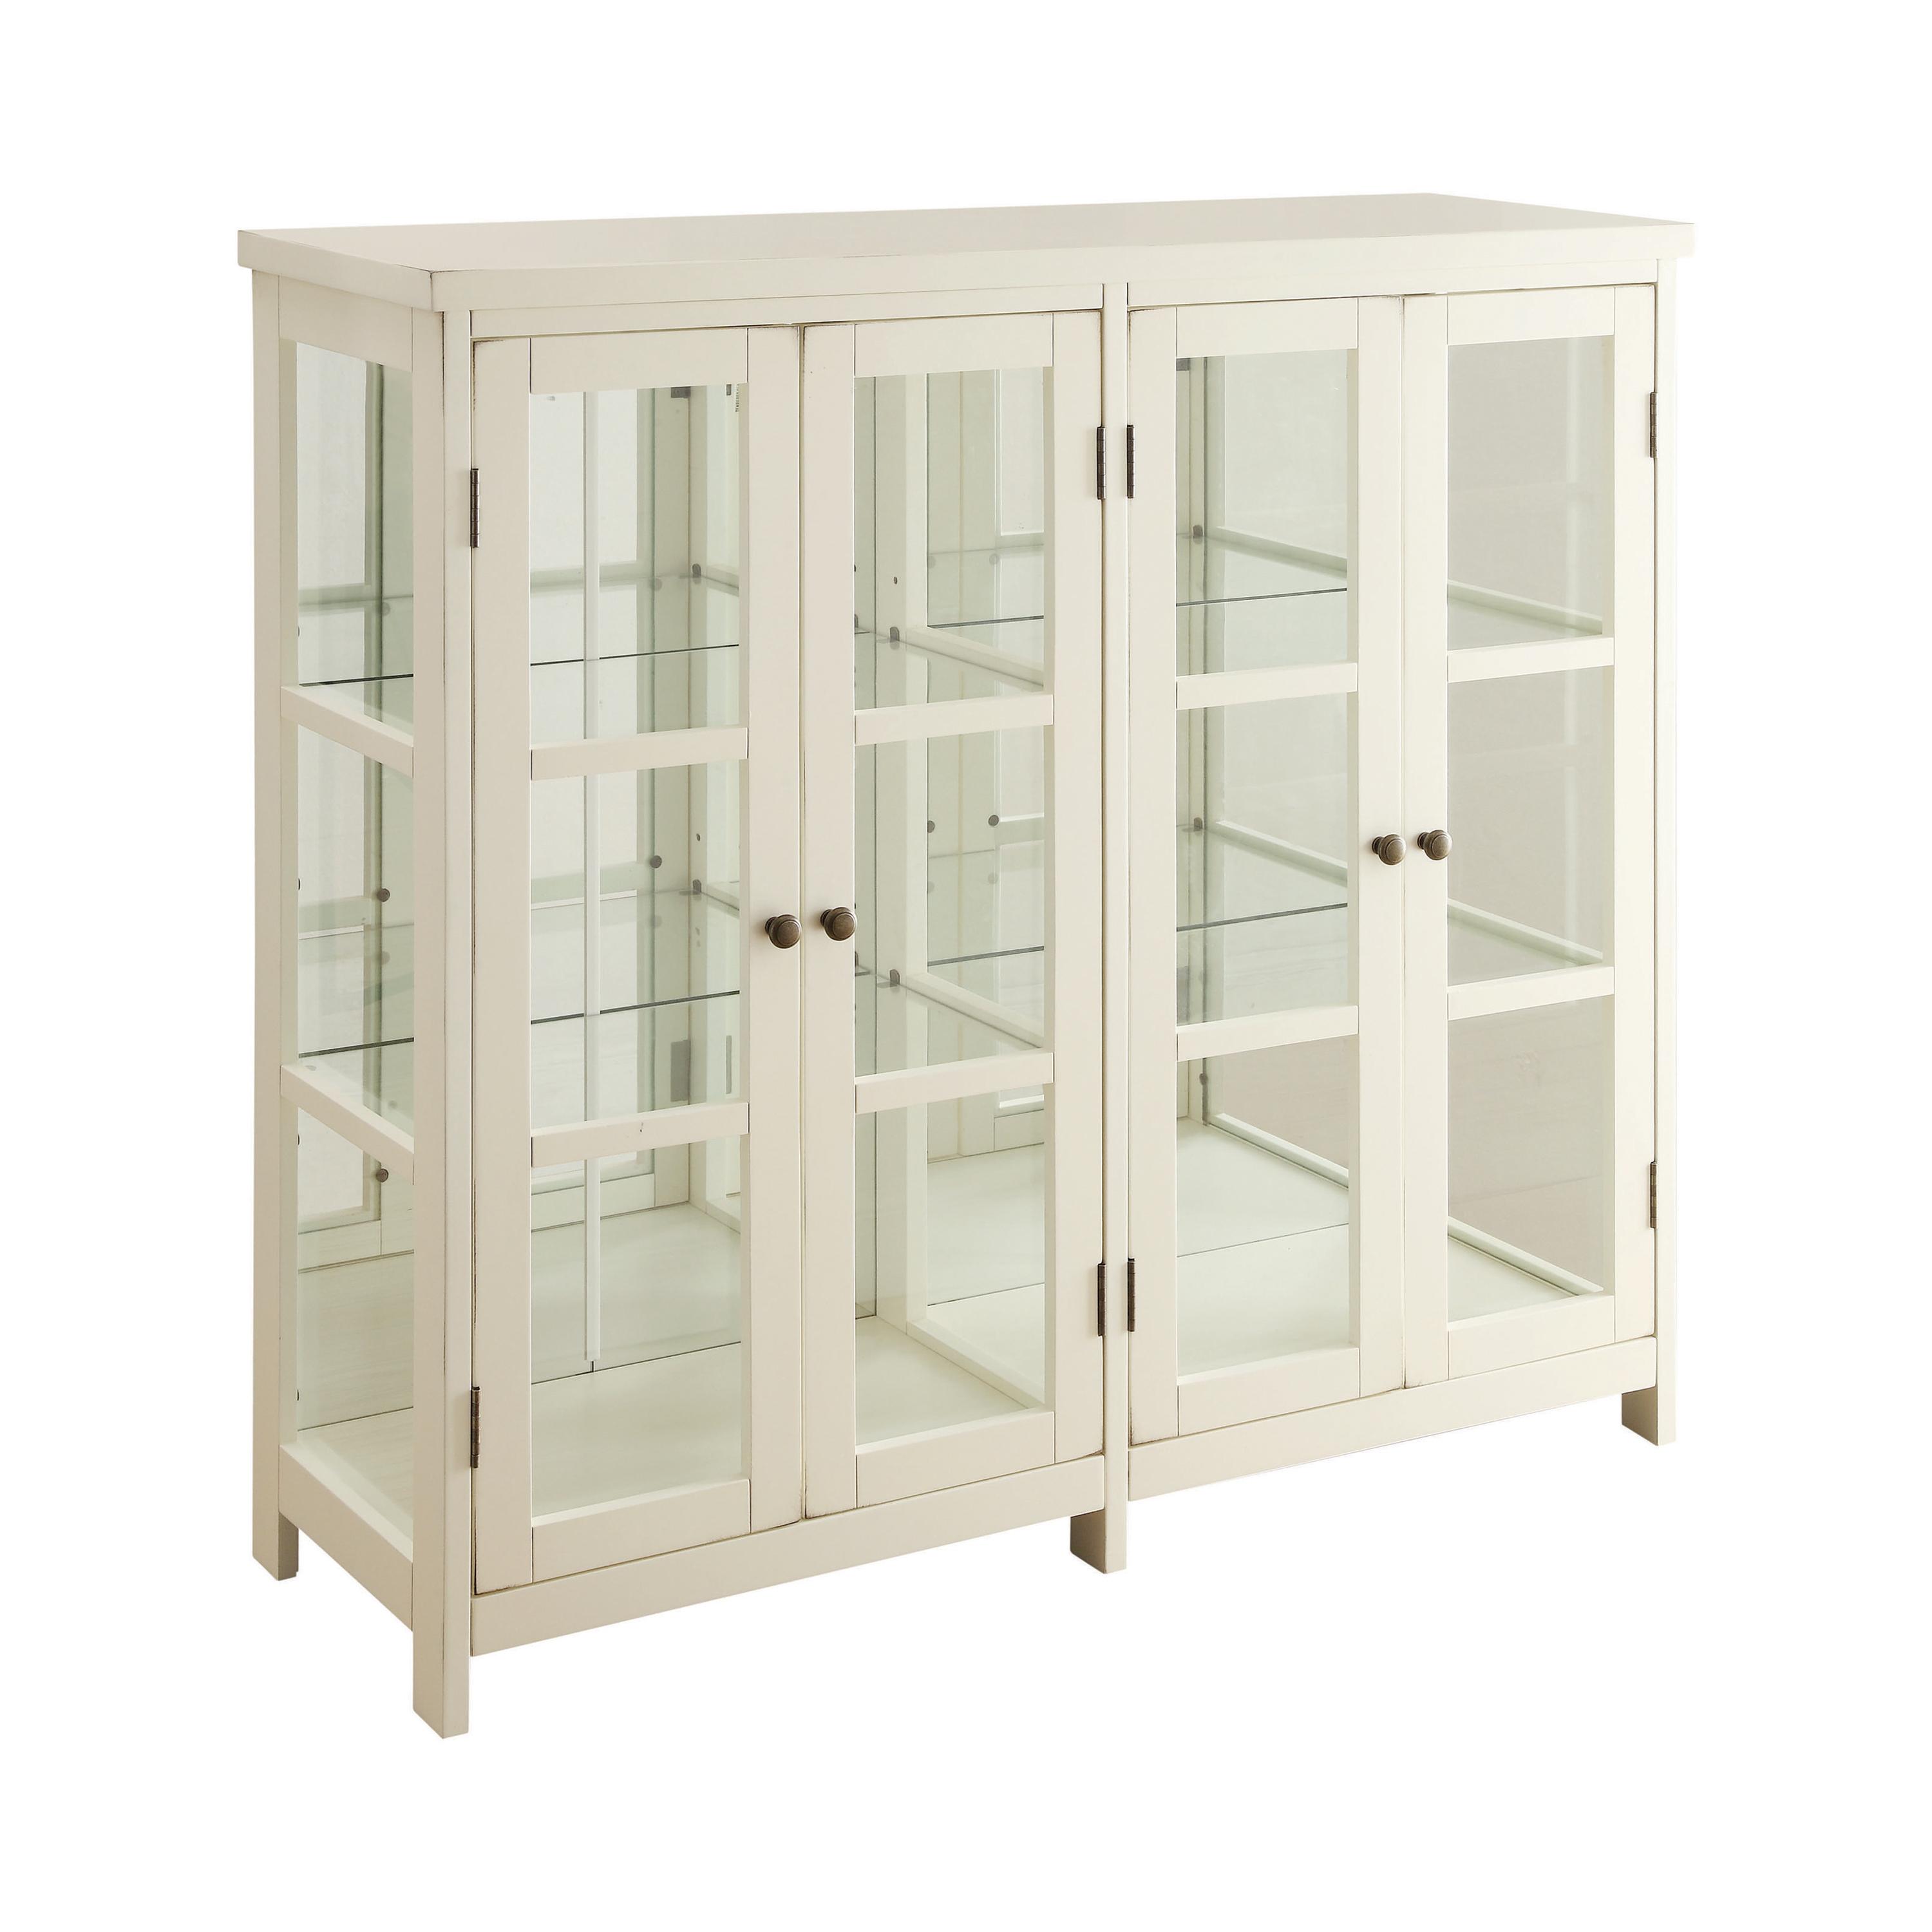 Transitional Accent Cabinet 950306 950306 in White 